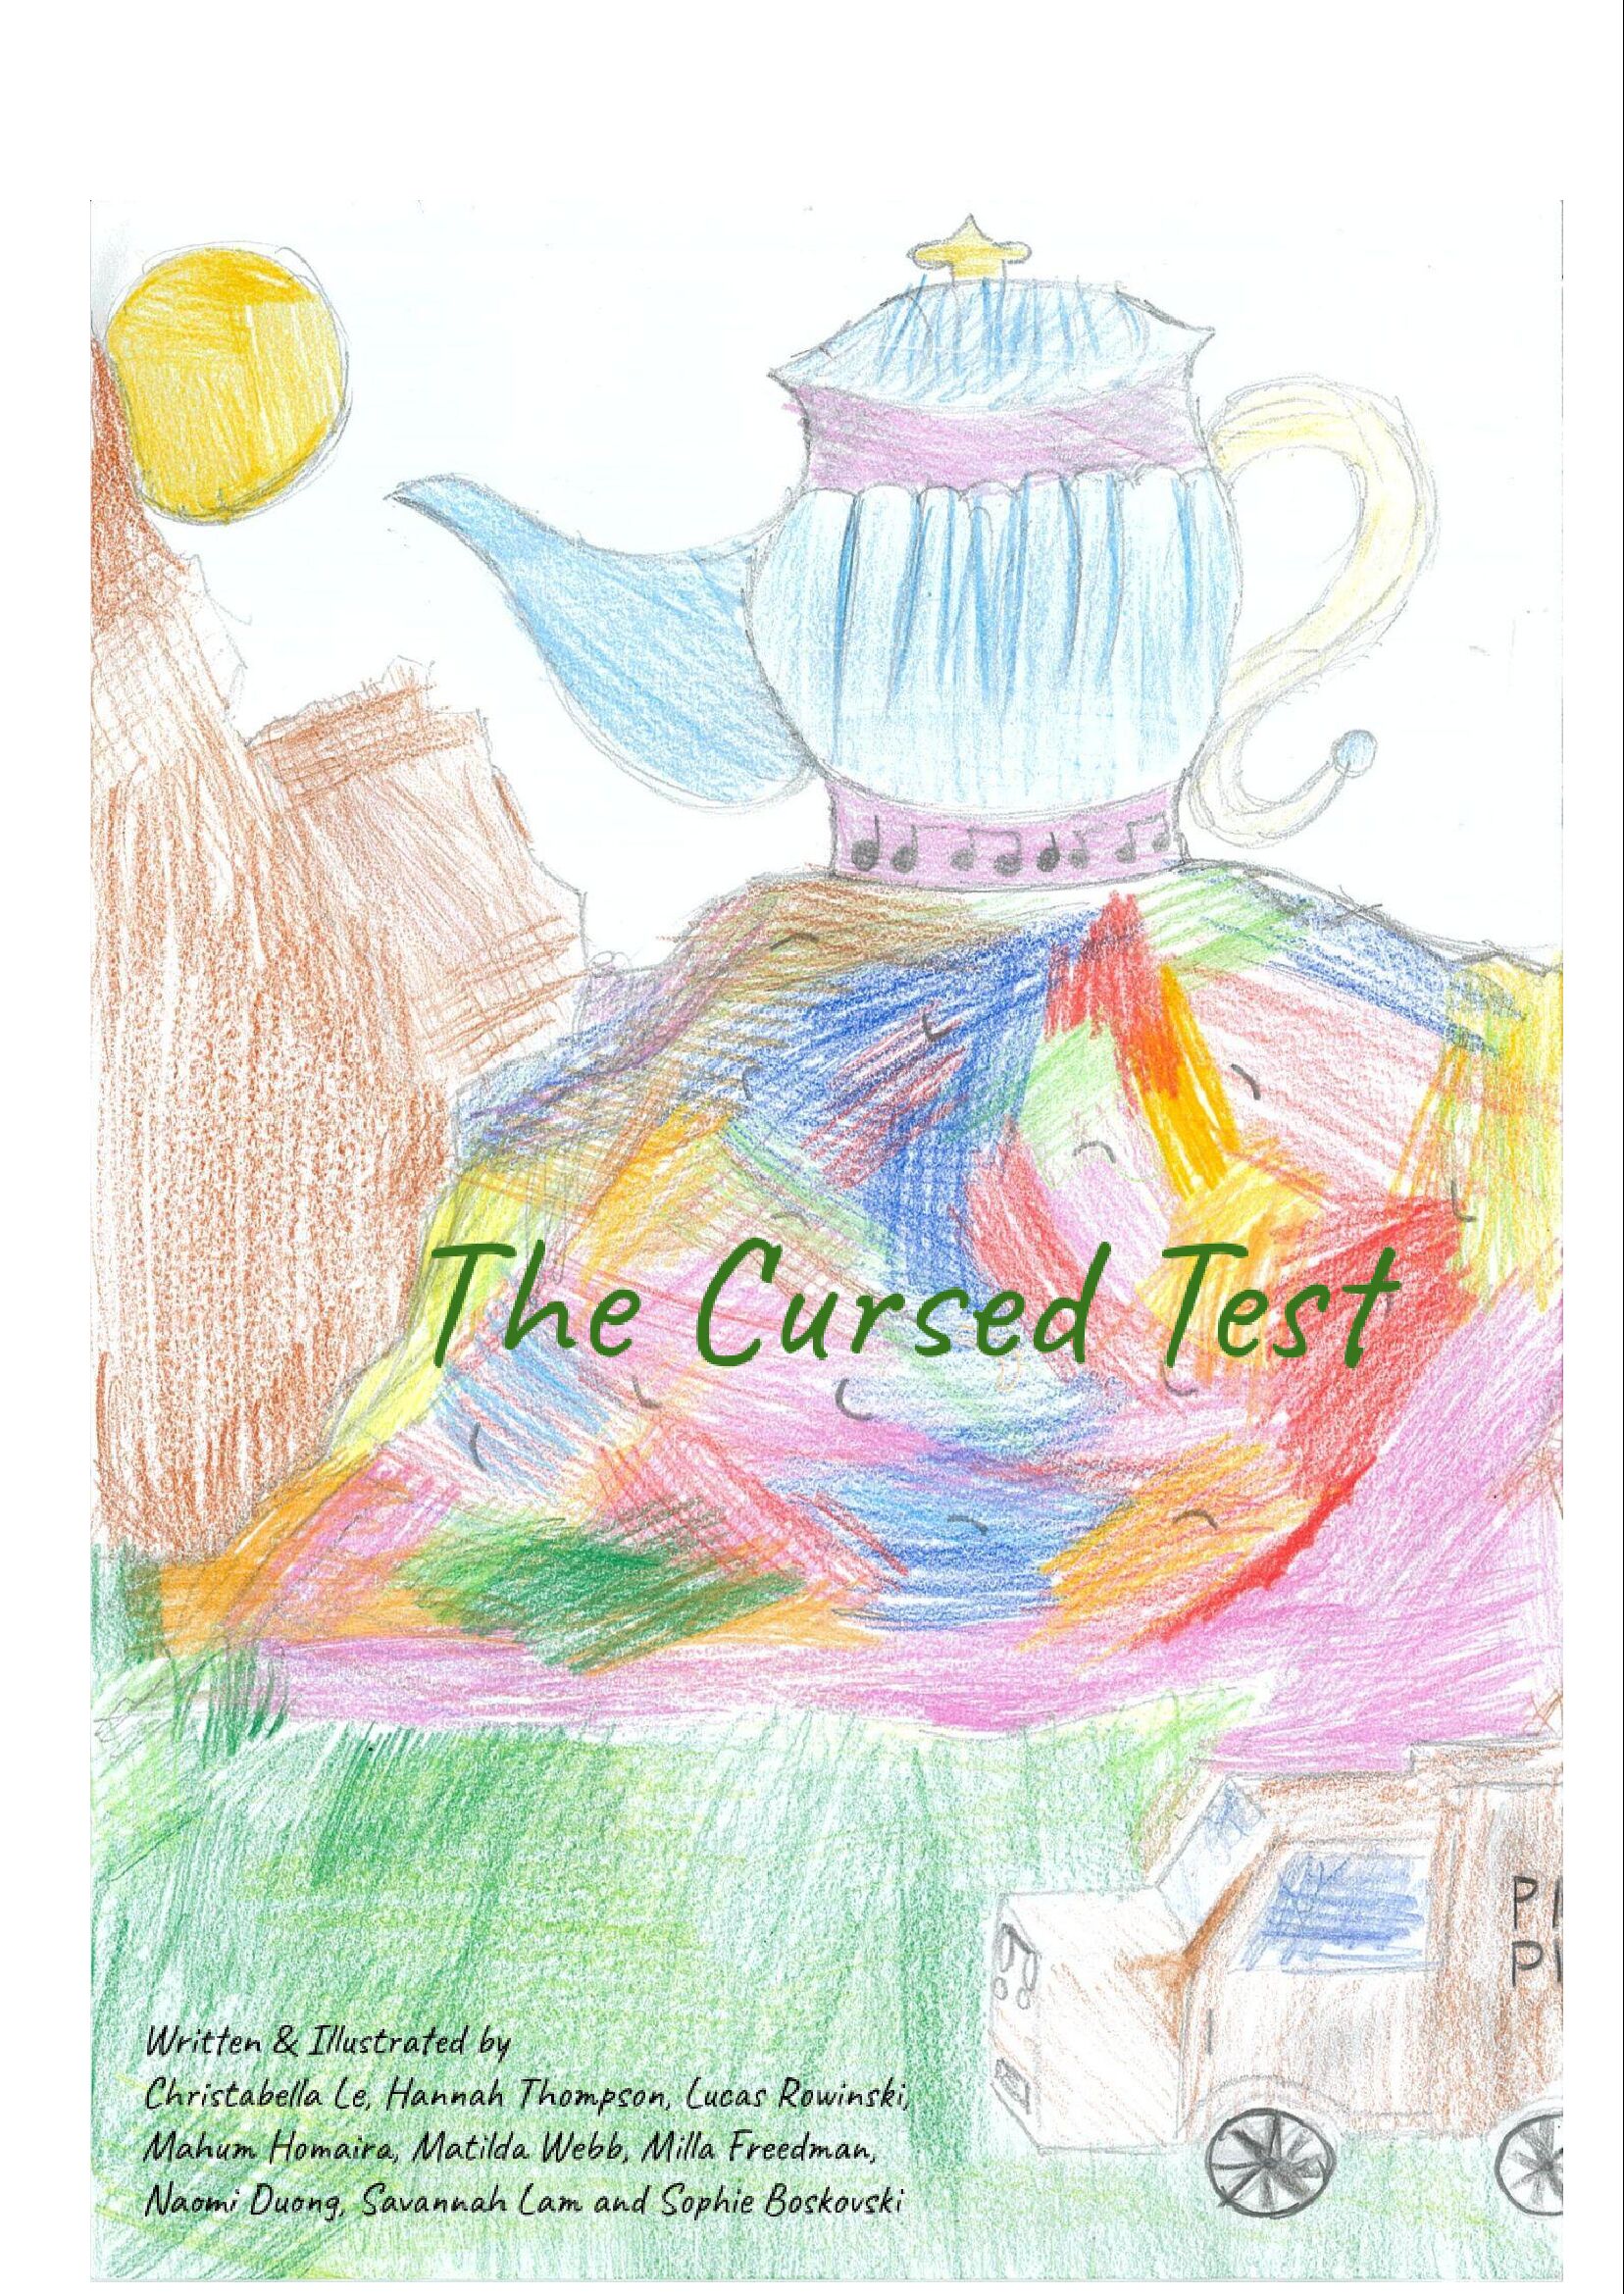 The Cursed Test